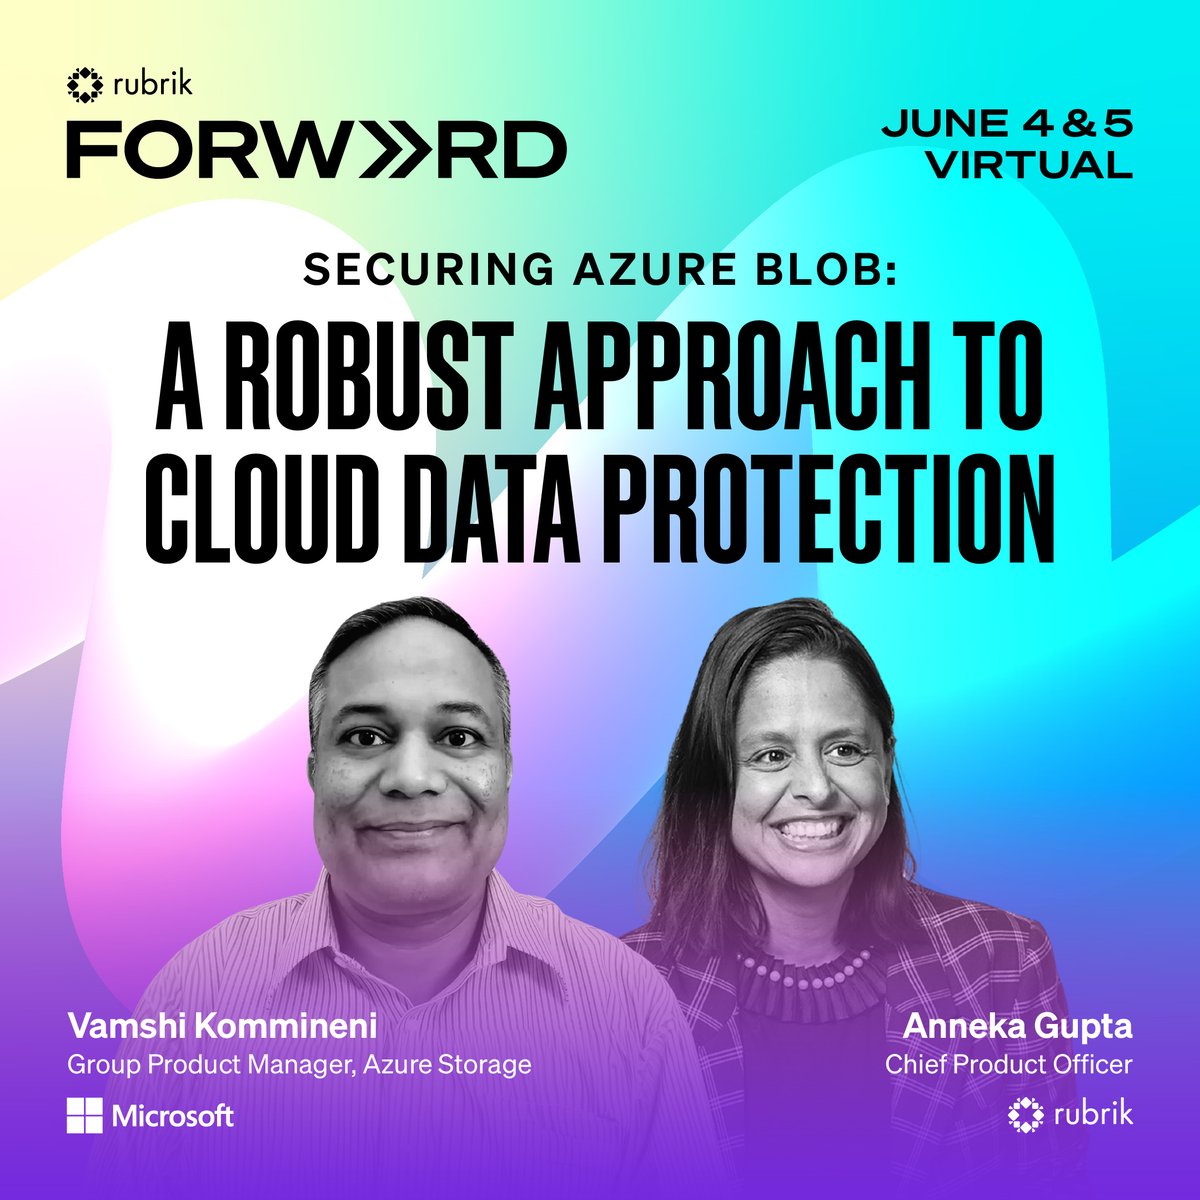 If you’re using #Azure Blob, then join us at #RubrikFORWARD to explore Rubrik data protection for @Azure Blob Storage! You’ll find out how to safeguard your cloud #data against threats and achieve seamless recovery…don’t miss it: rbrk.co/4axN3oW